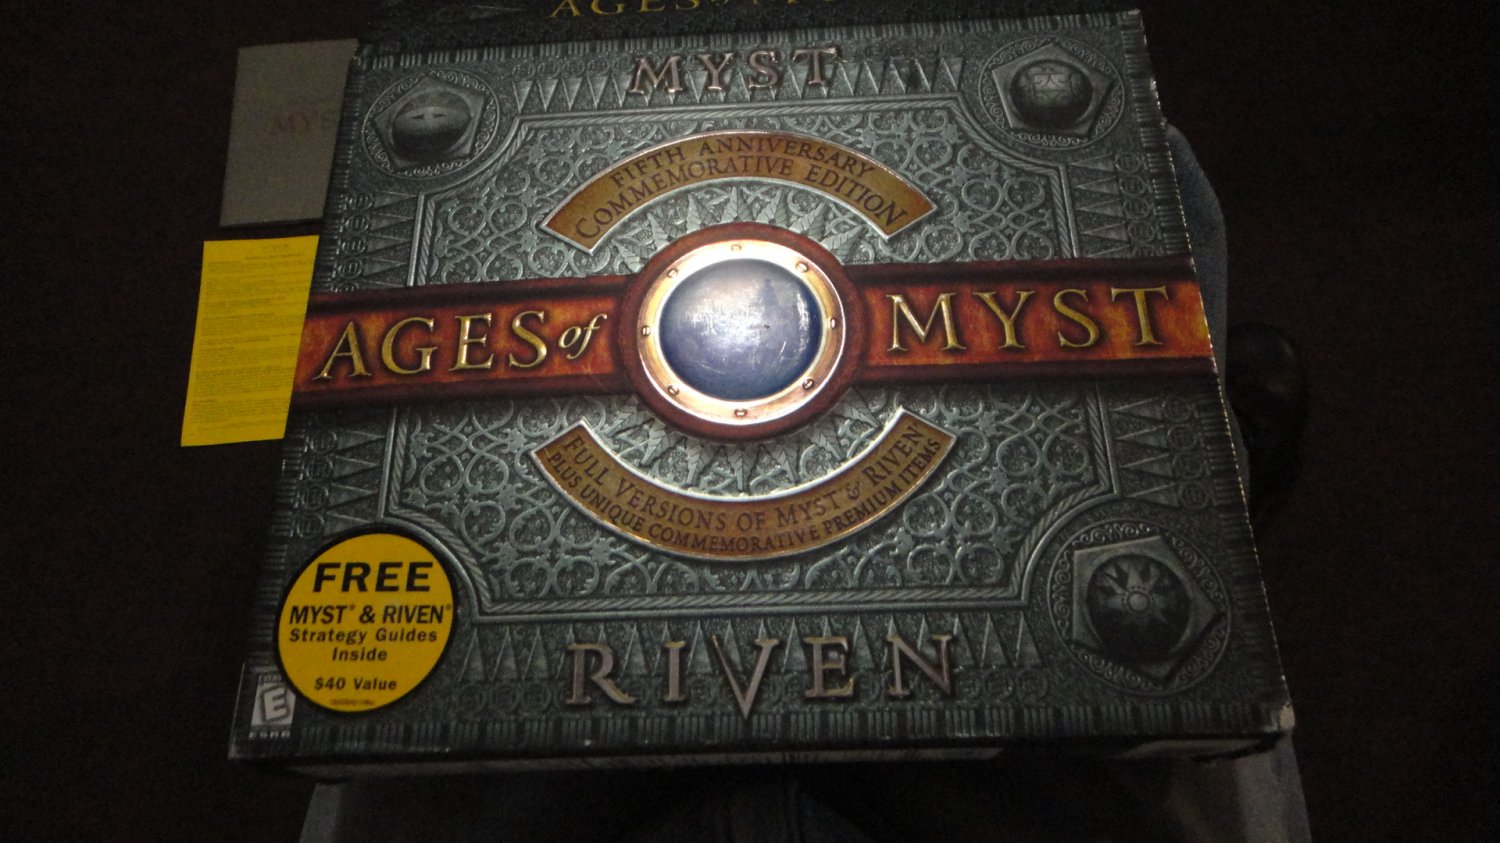 Ages of Myst: Myst & Riven--Fifth Anniversary Commemorative Edition....Good w/box.